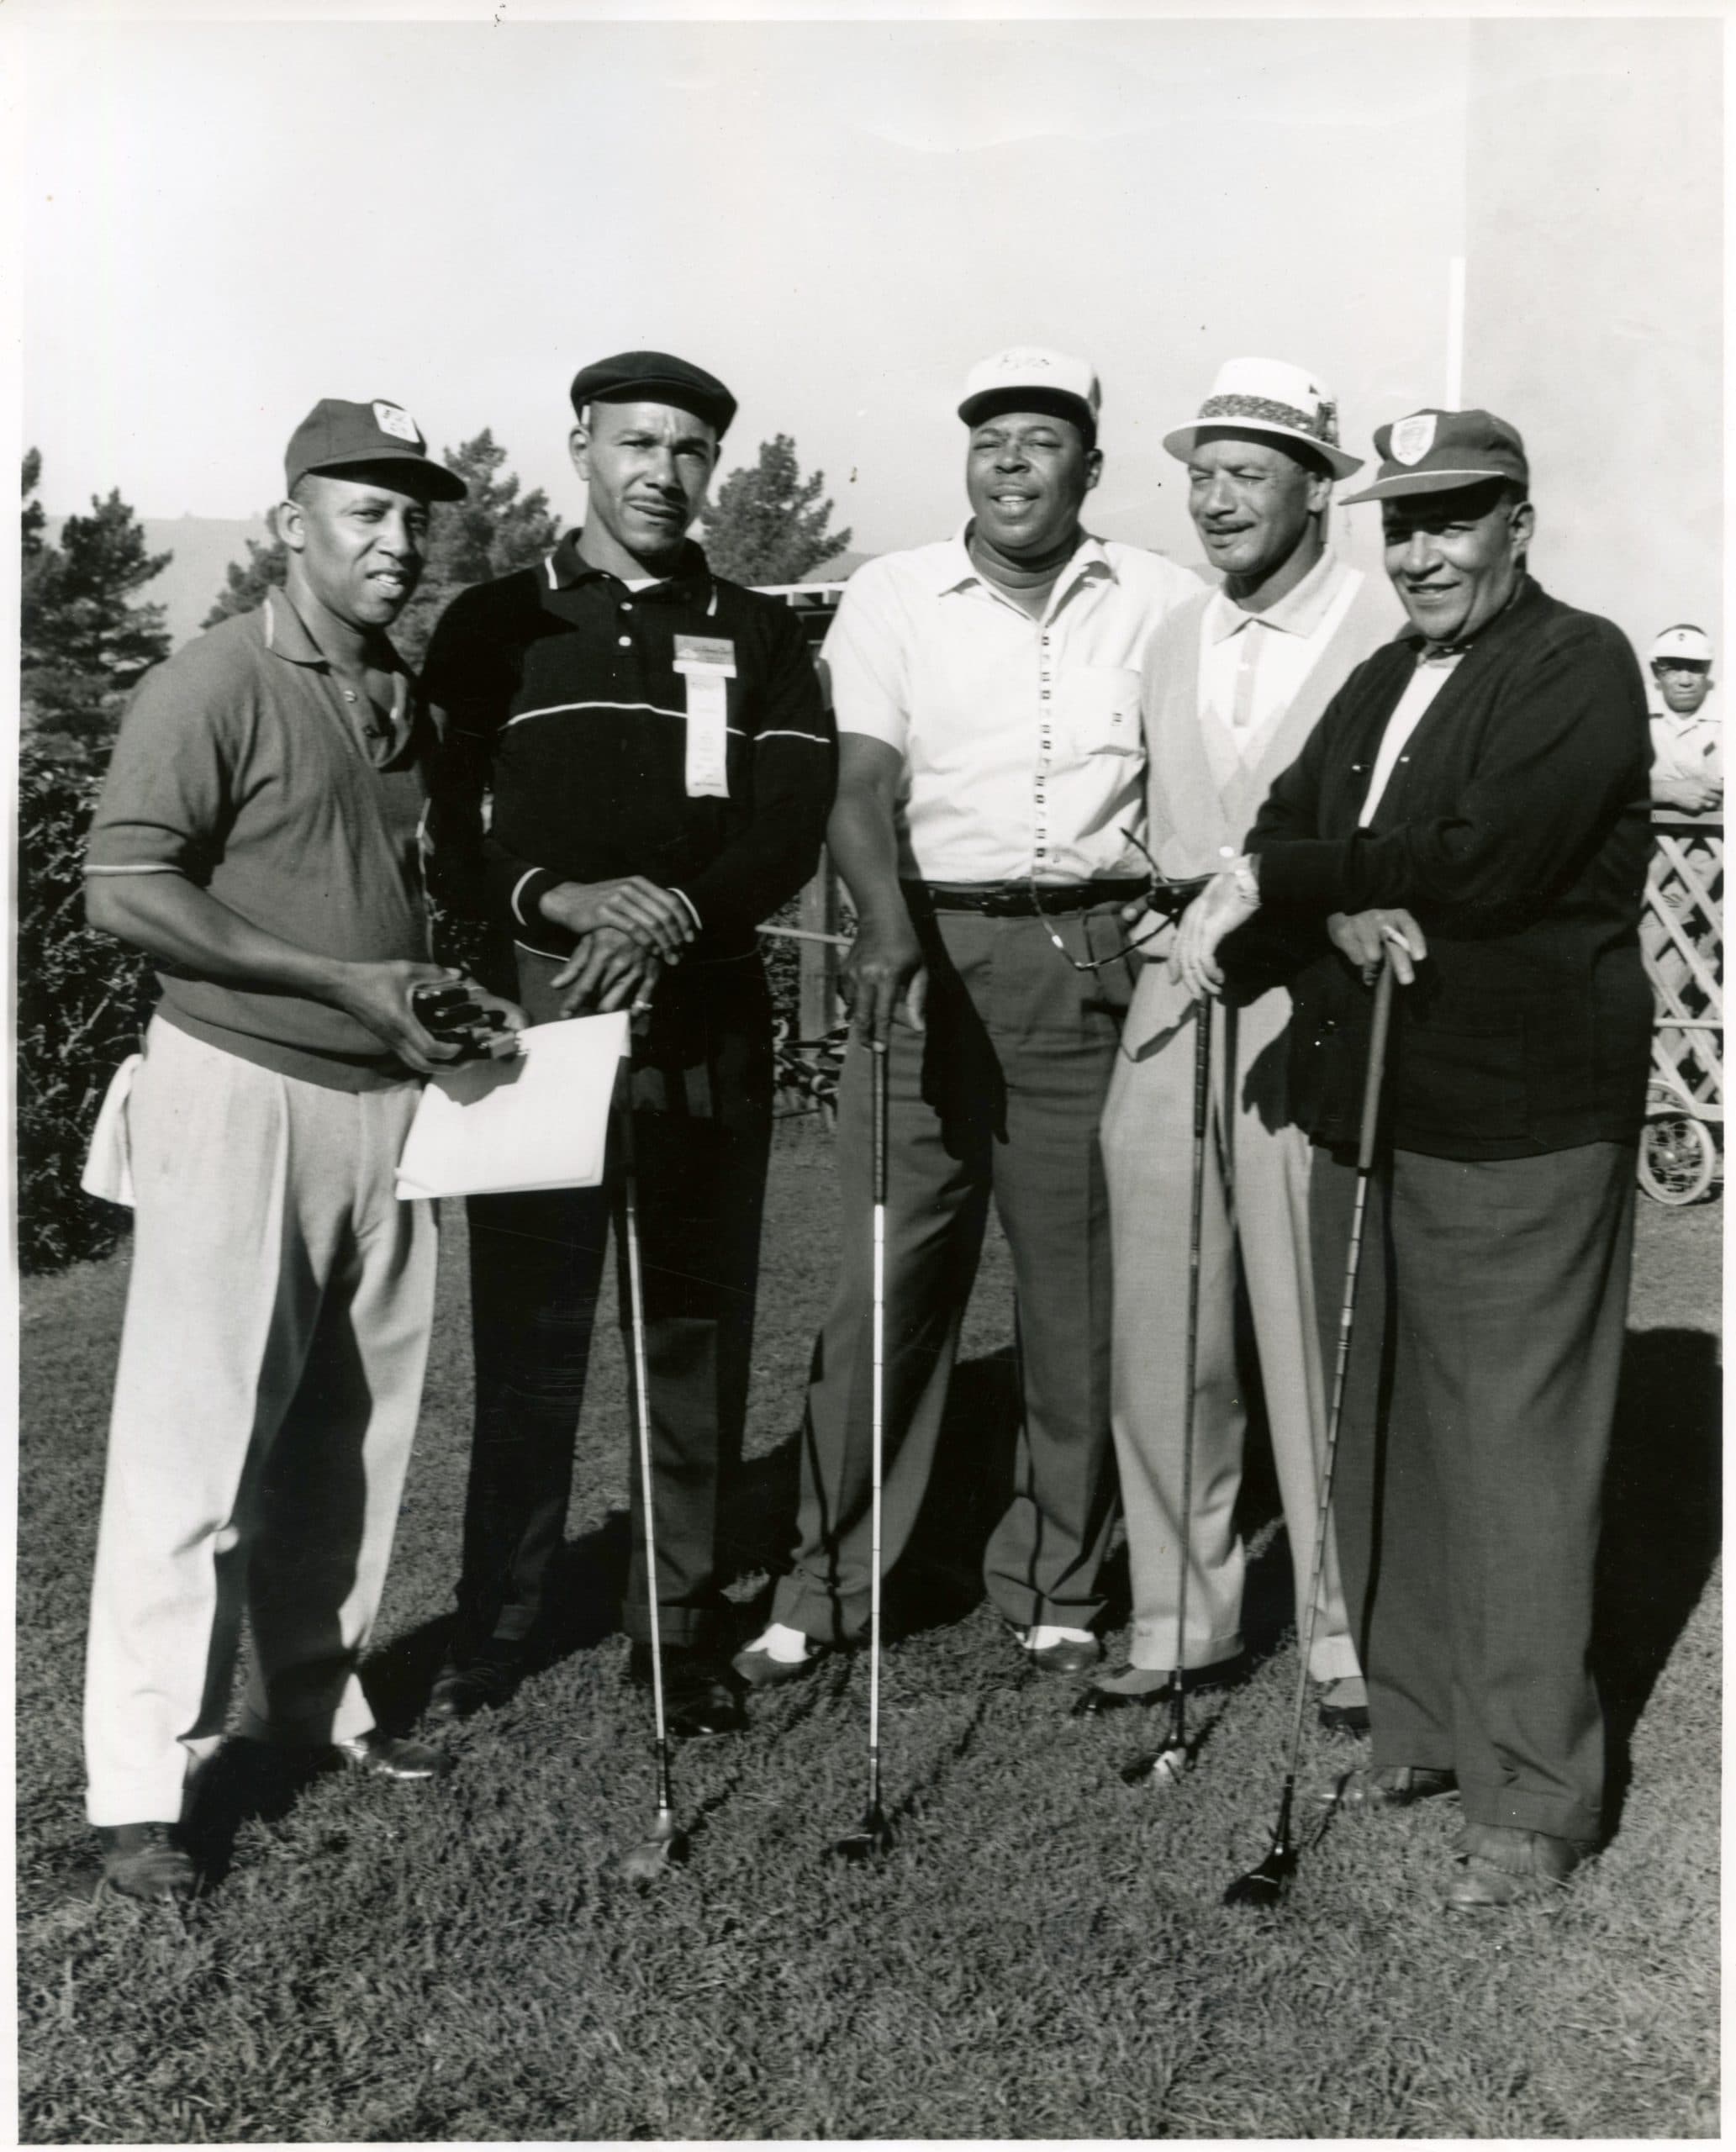 Group photograph of golfers